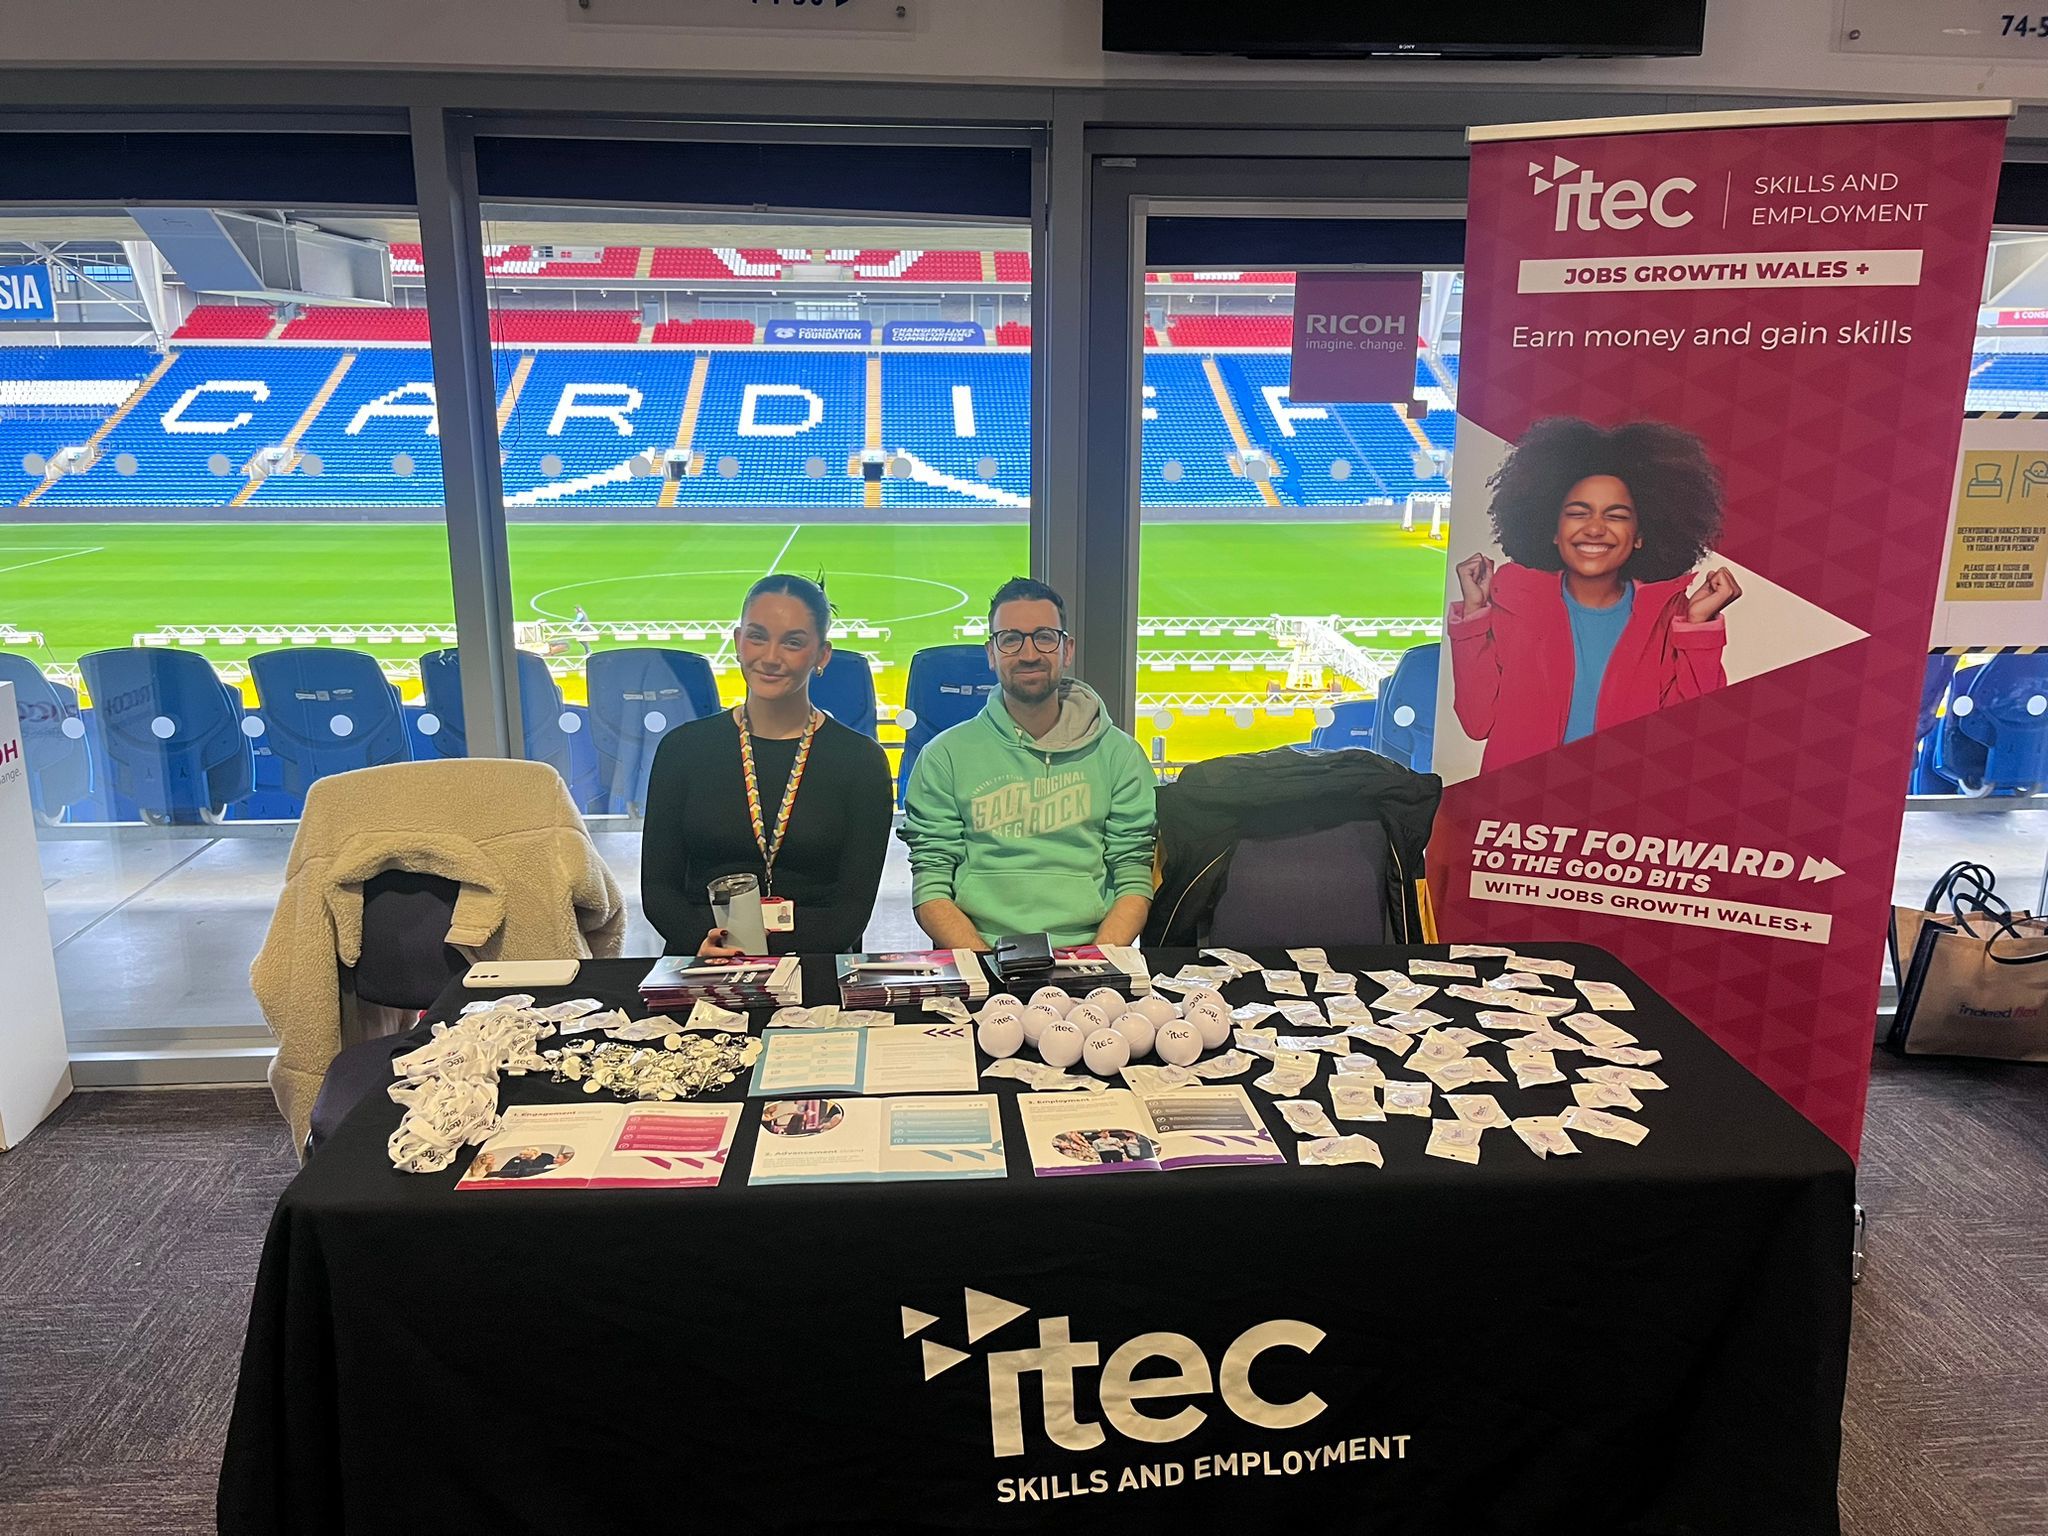 Itec Skills and Employment at our event in Cardiff